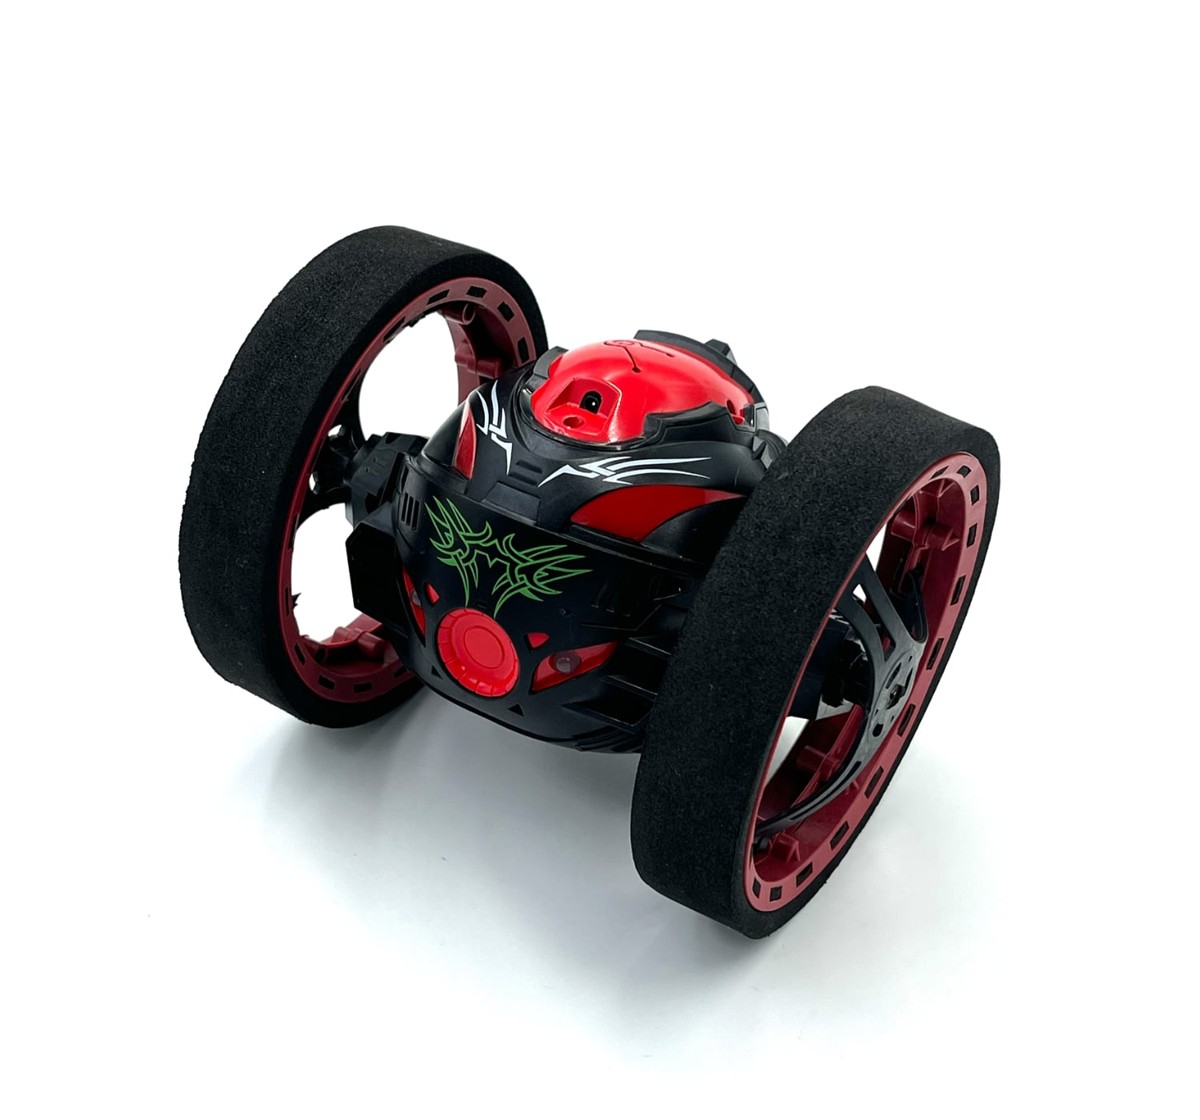 Ralleyz Remote Control Sumo Jumping Car, Bounce Car For Kids with LED Lights, 360 Degree Rotation and Music, Jumps Upto 80cm, Red, 6Y+